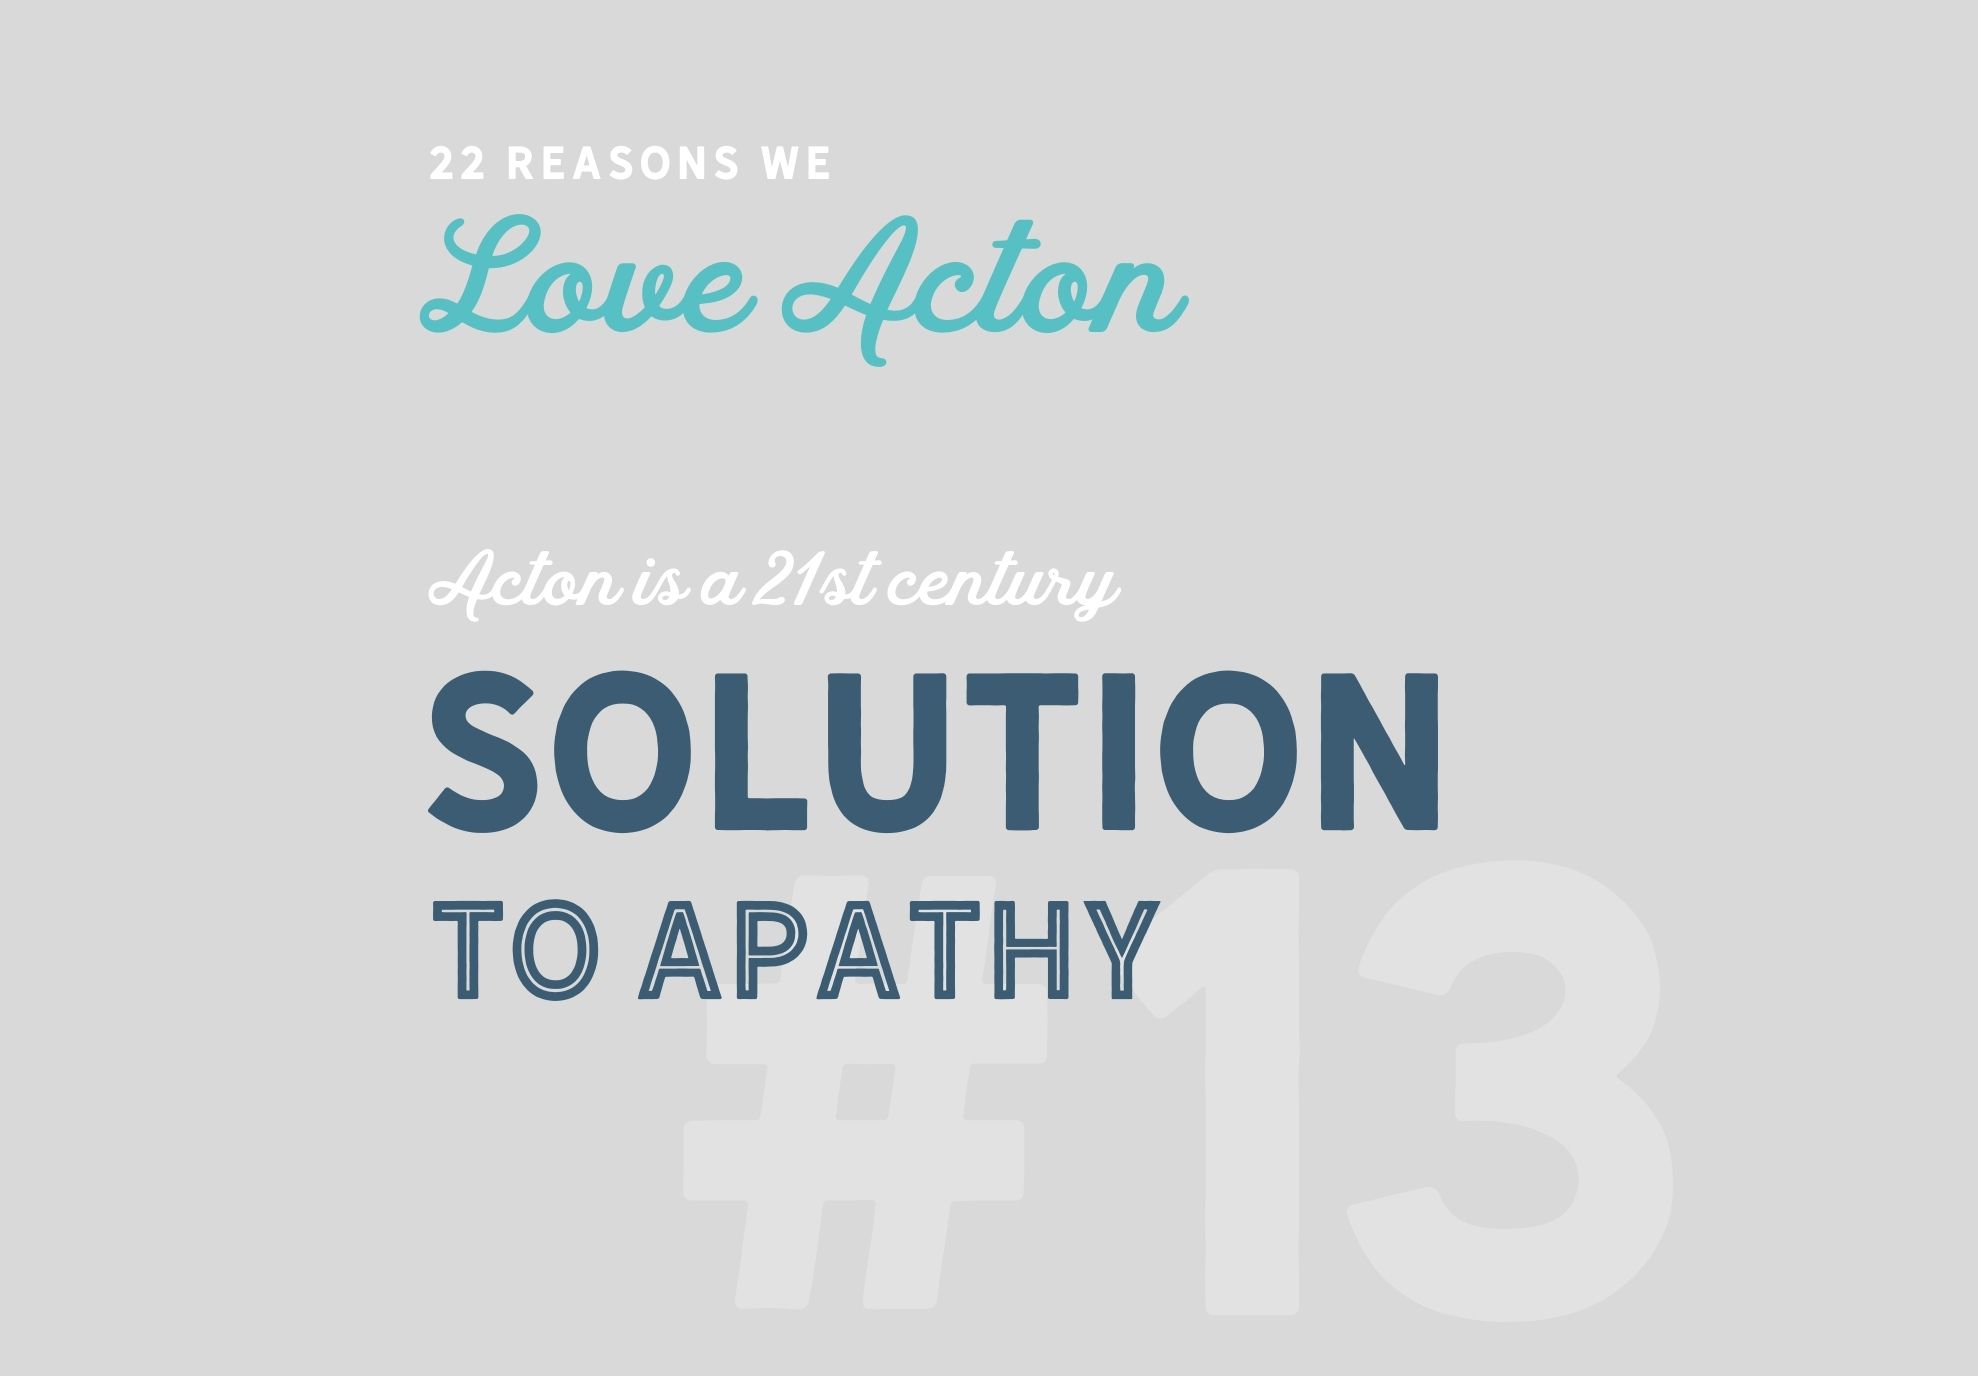 #13 Acton is a 21st Solution to Apathy